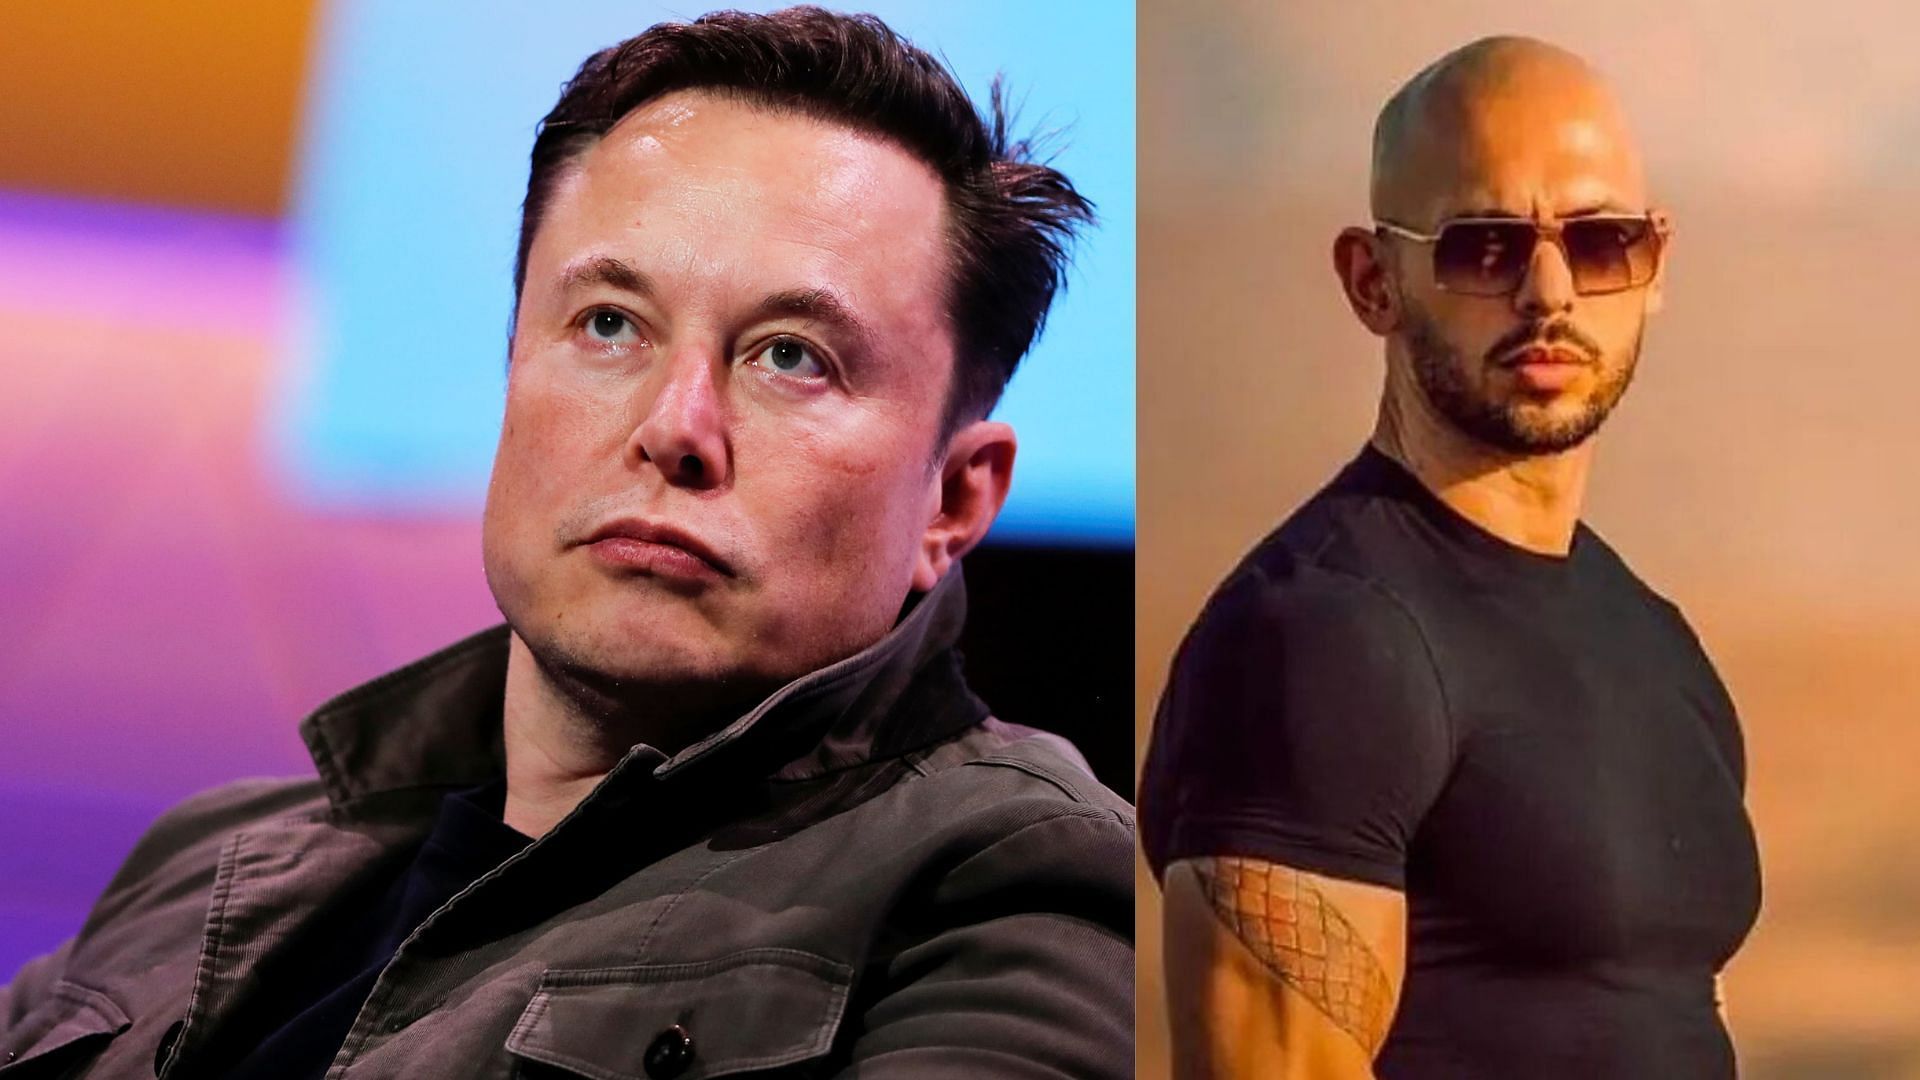 Elon Musk recently took a shot at Logan Paul and Andrew Tate